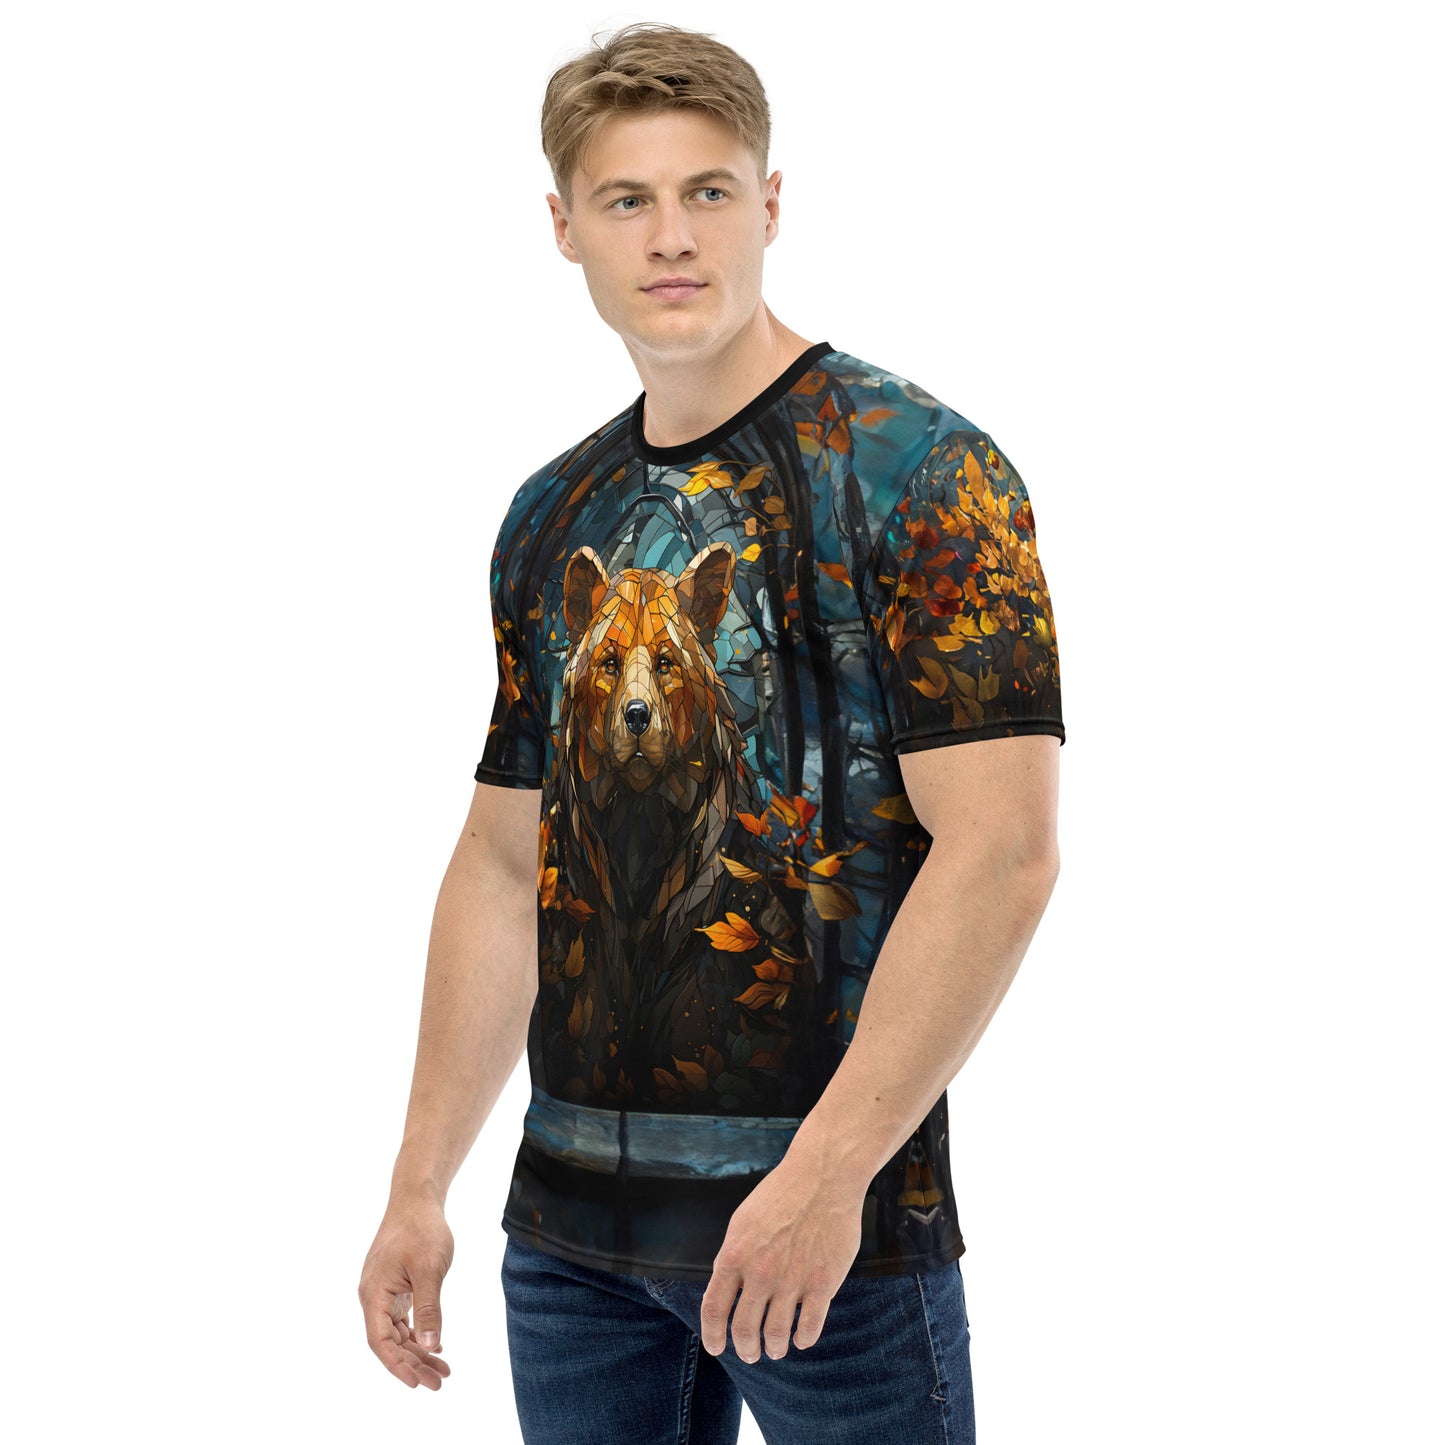 Stained Glass Bear All Over Print Men's T-Shirt